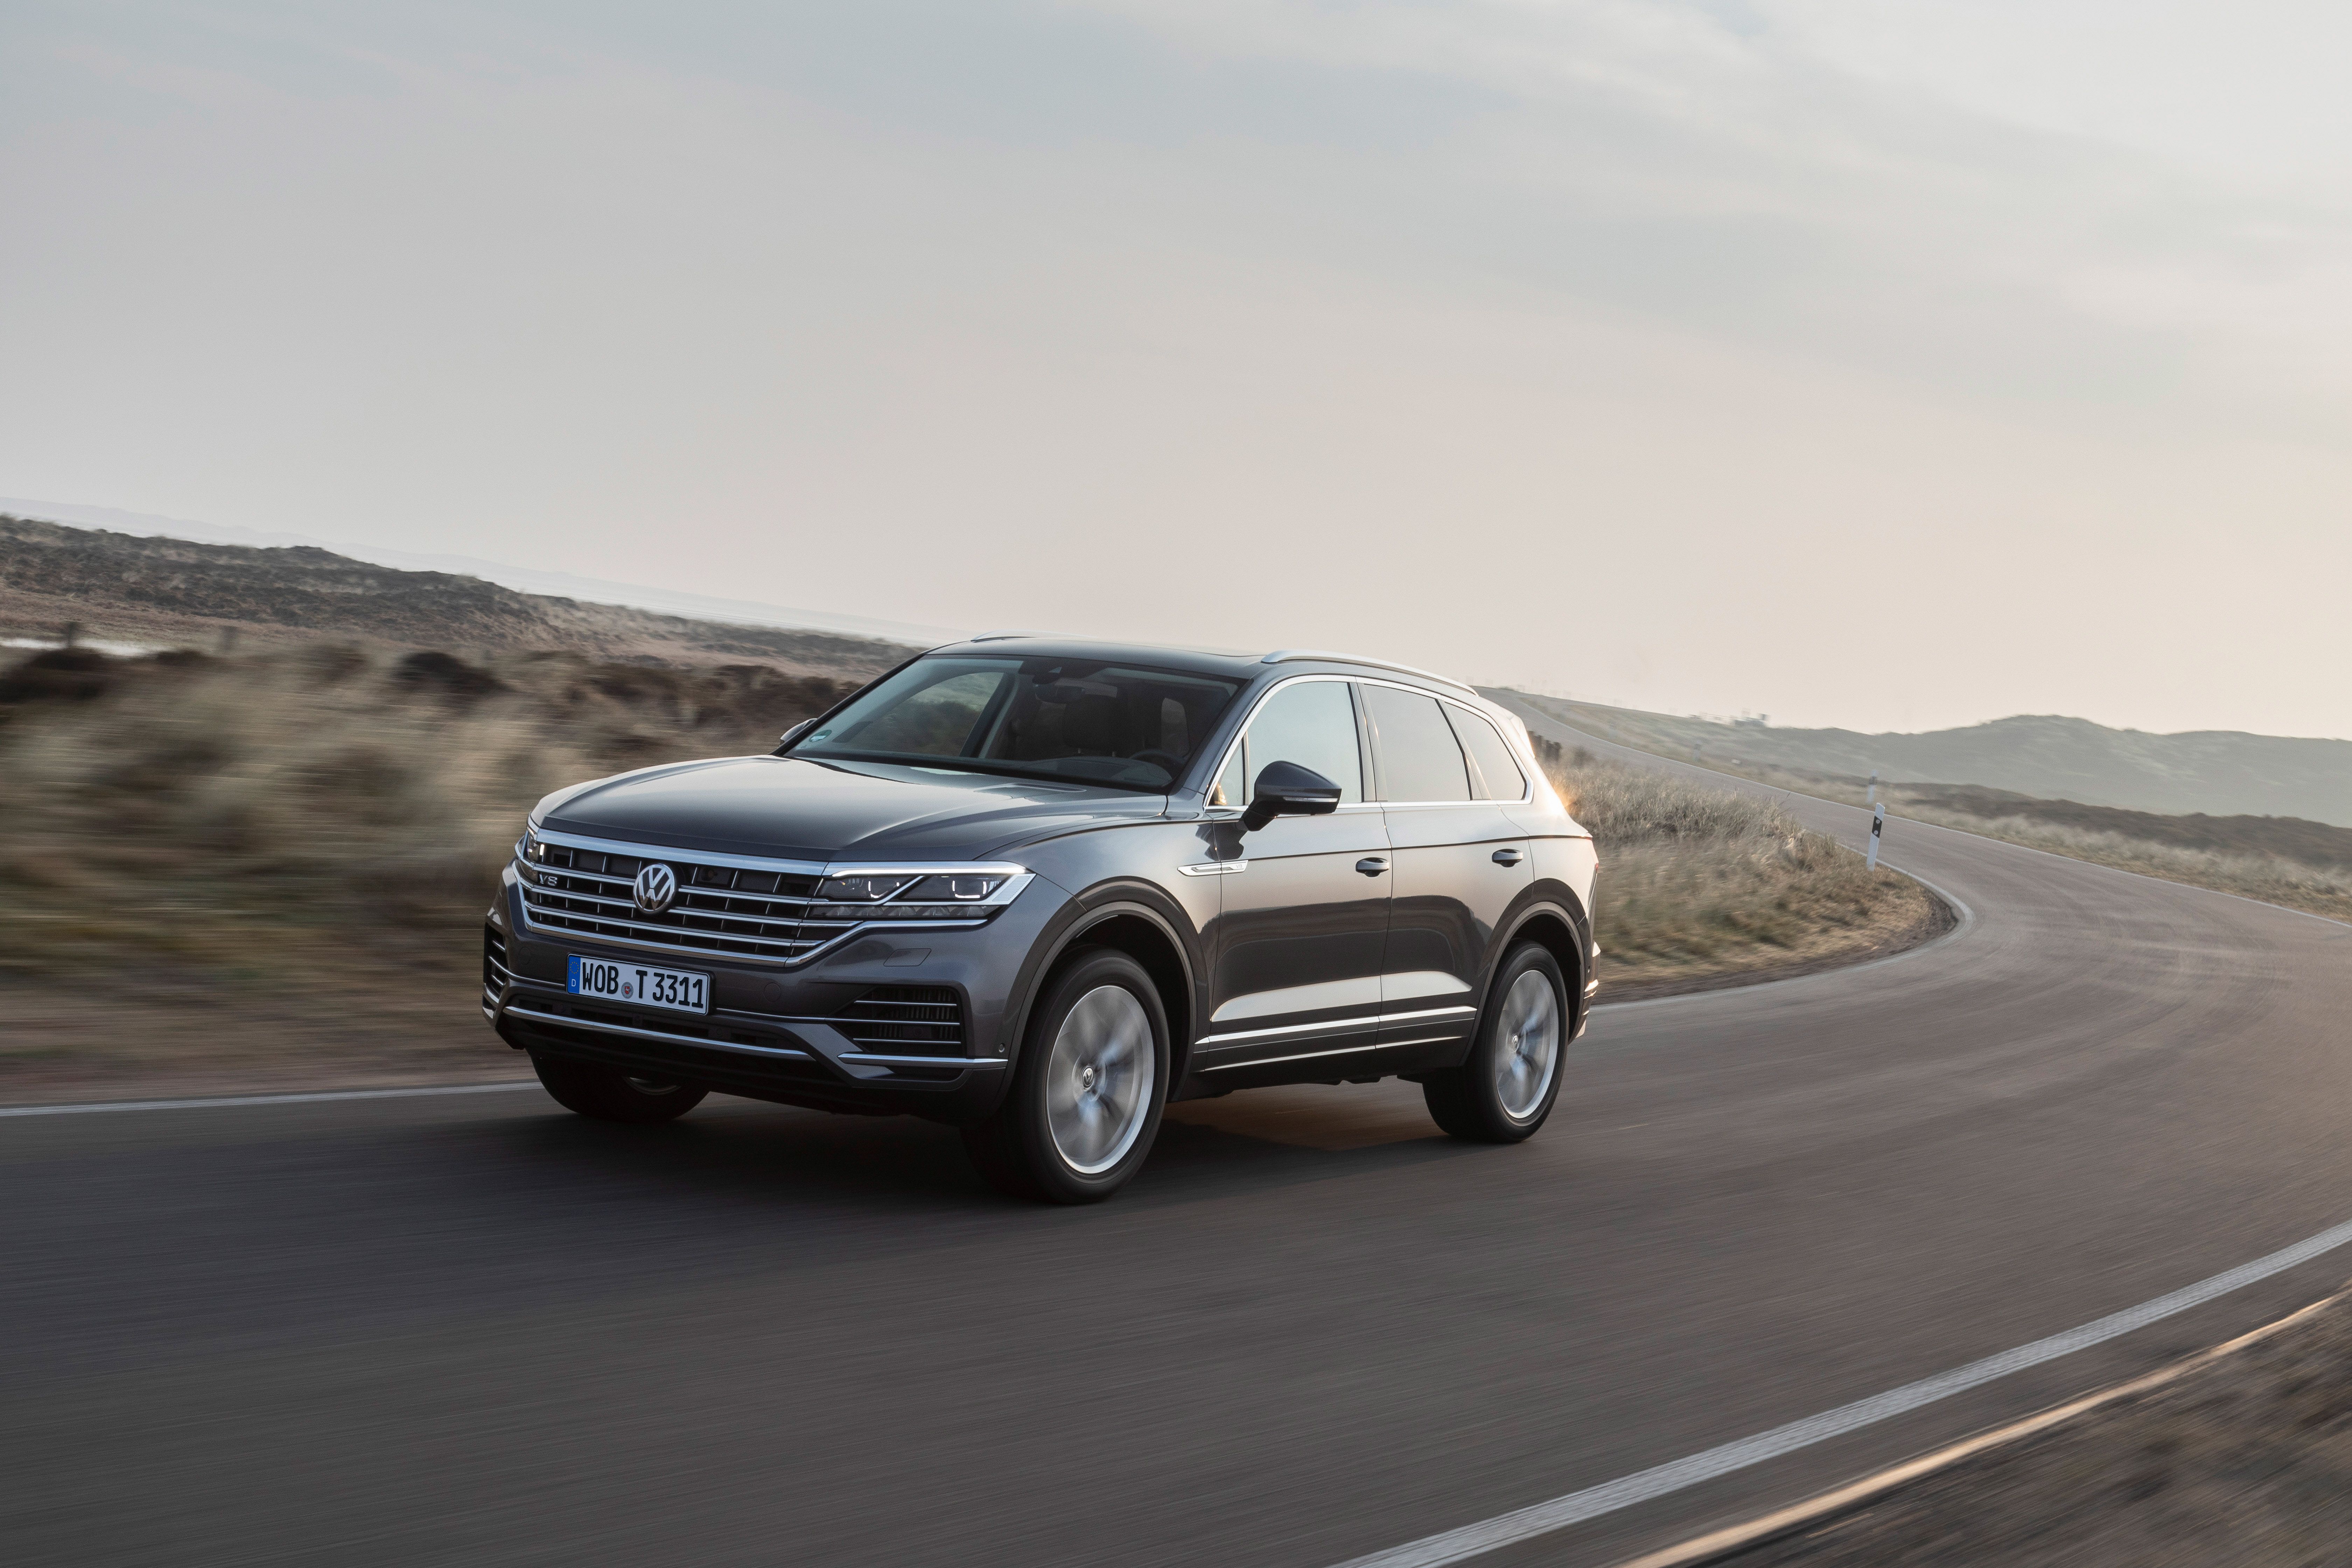 Comments On 2020 Vw Touareg V8 Tdi In Europe The Diesel Continues To